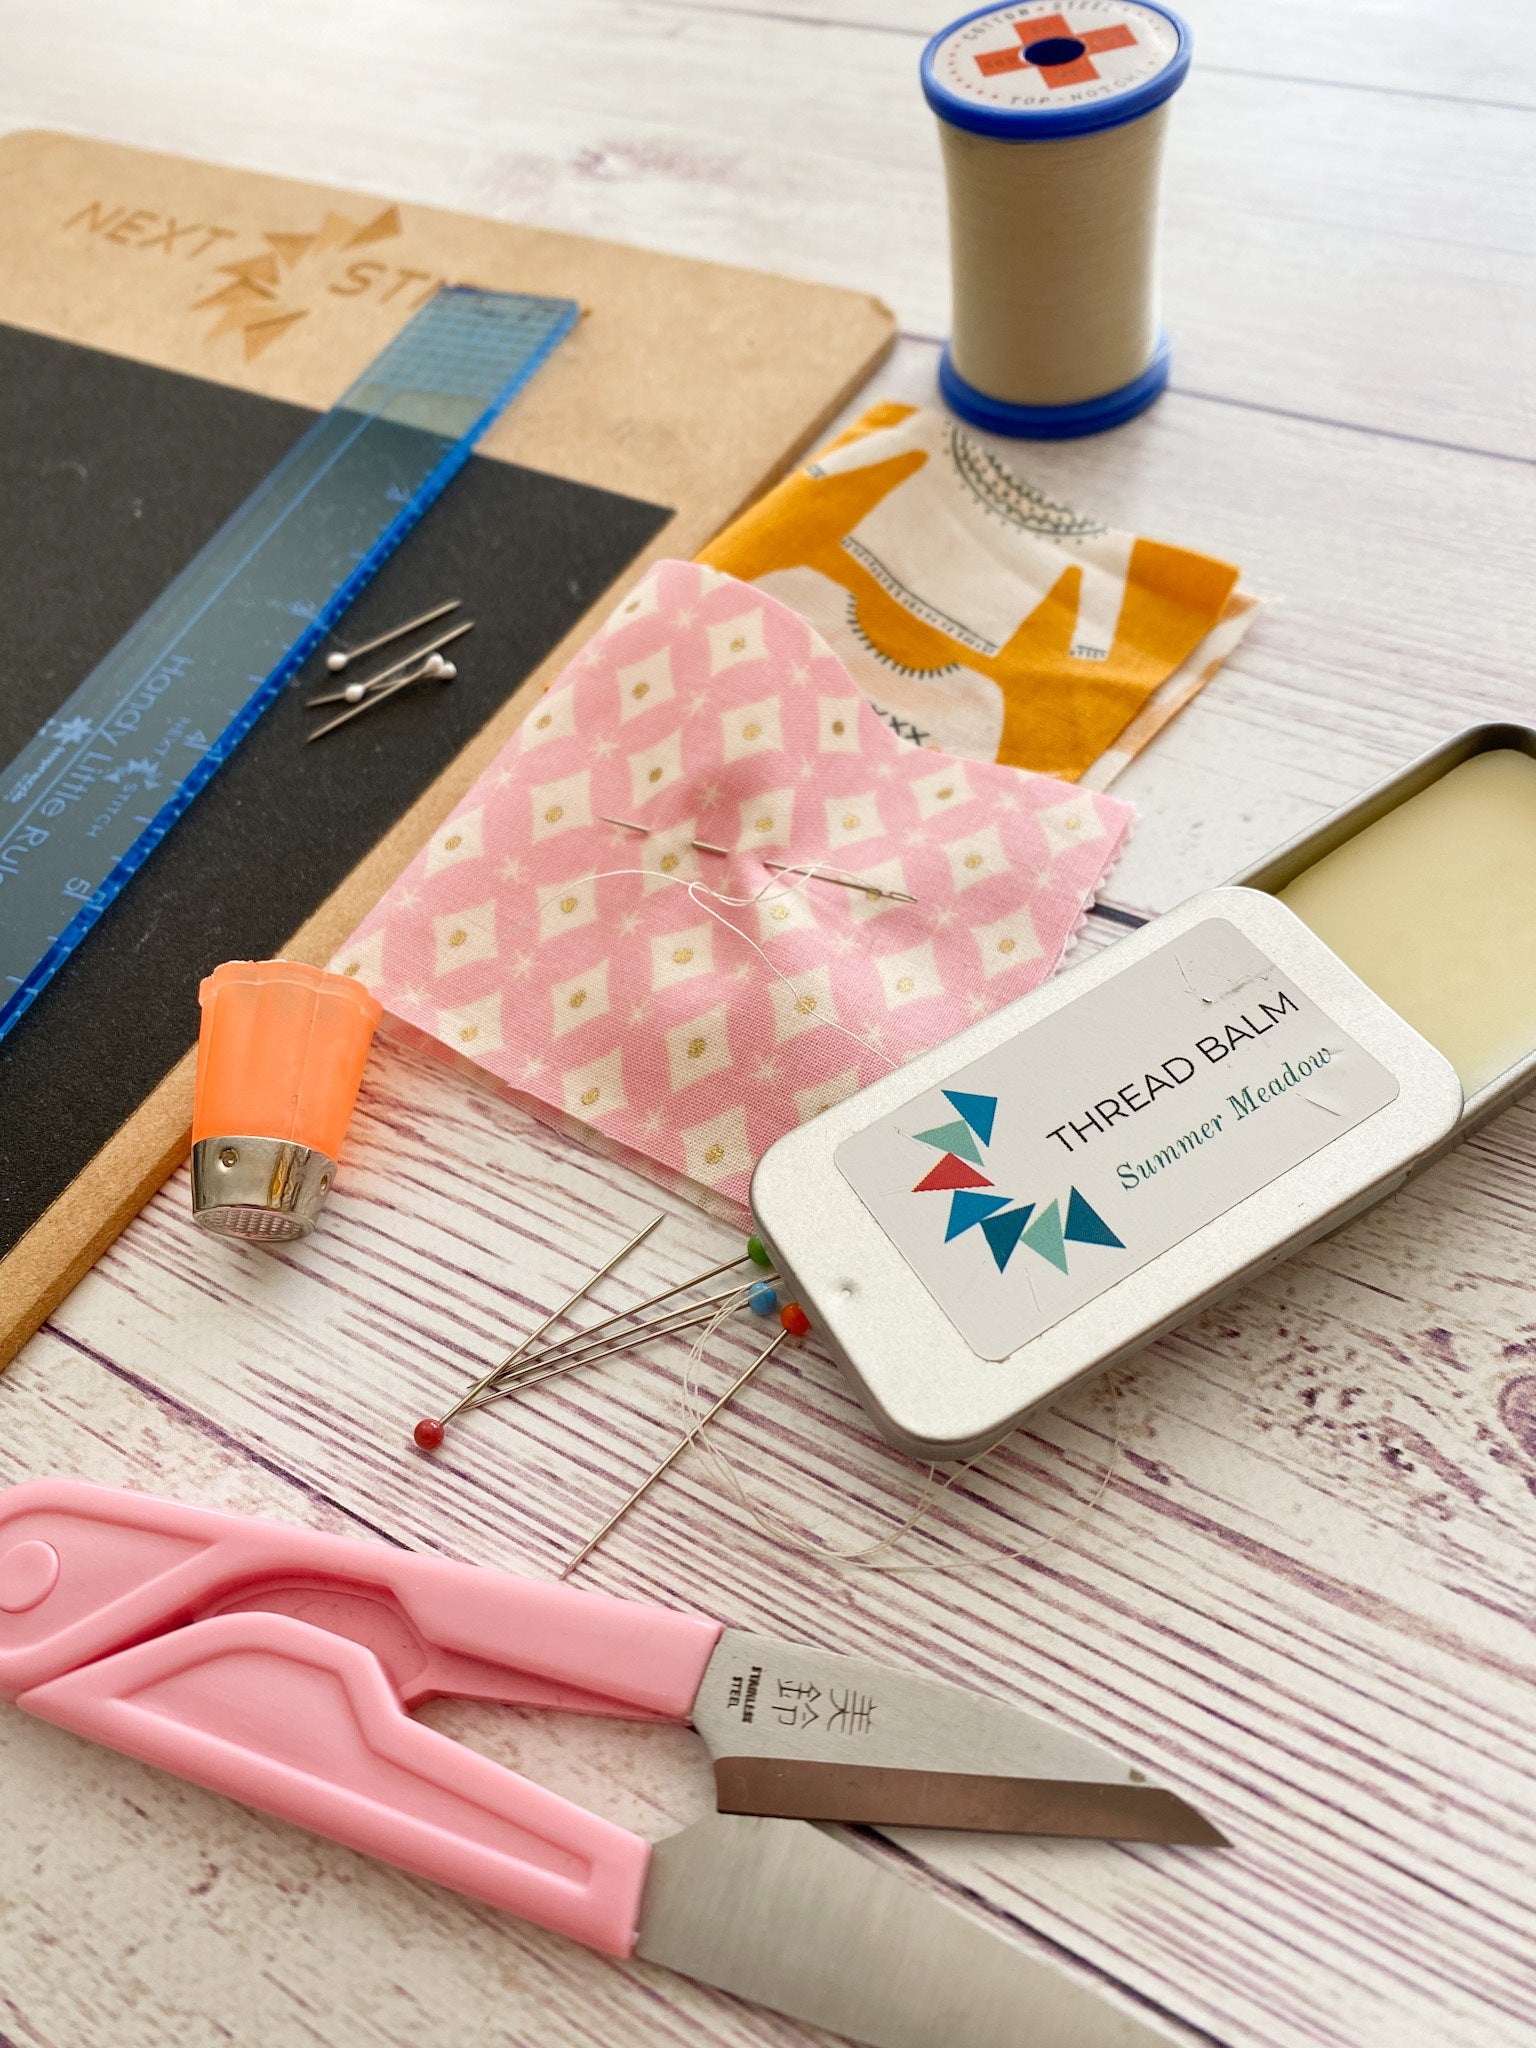 A round-up of my hand sewing essentials for a more satisfying stitching experience